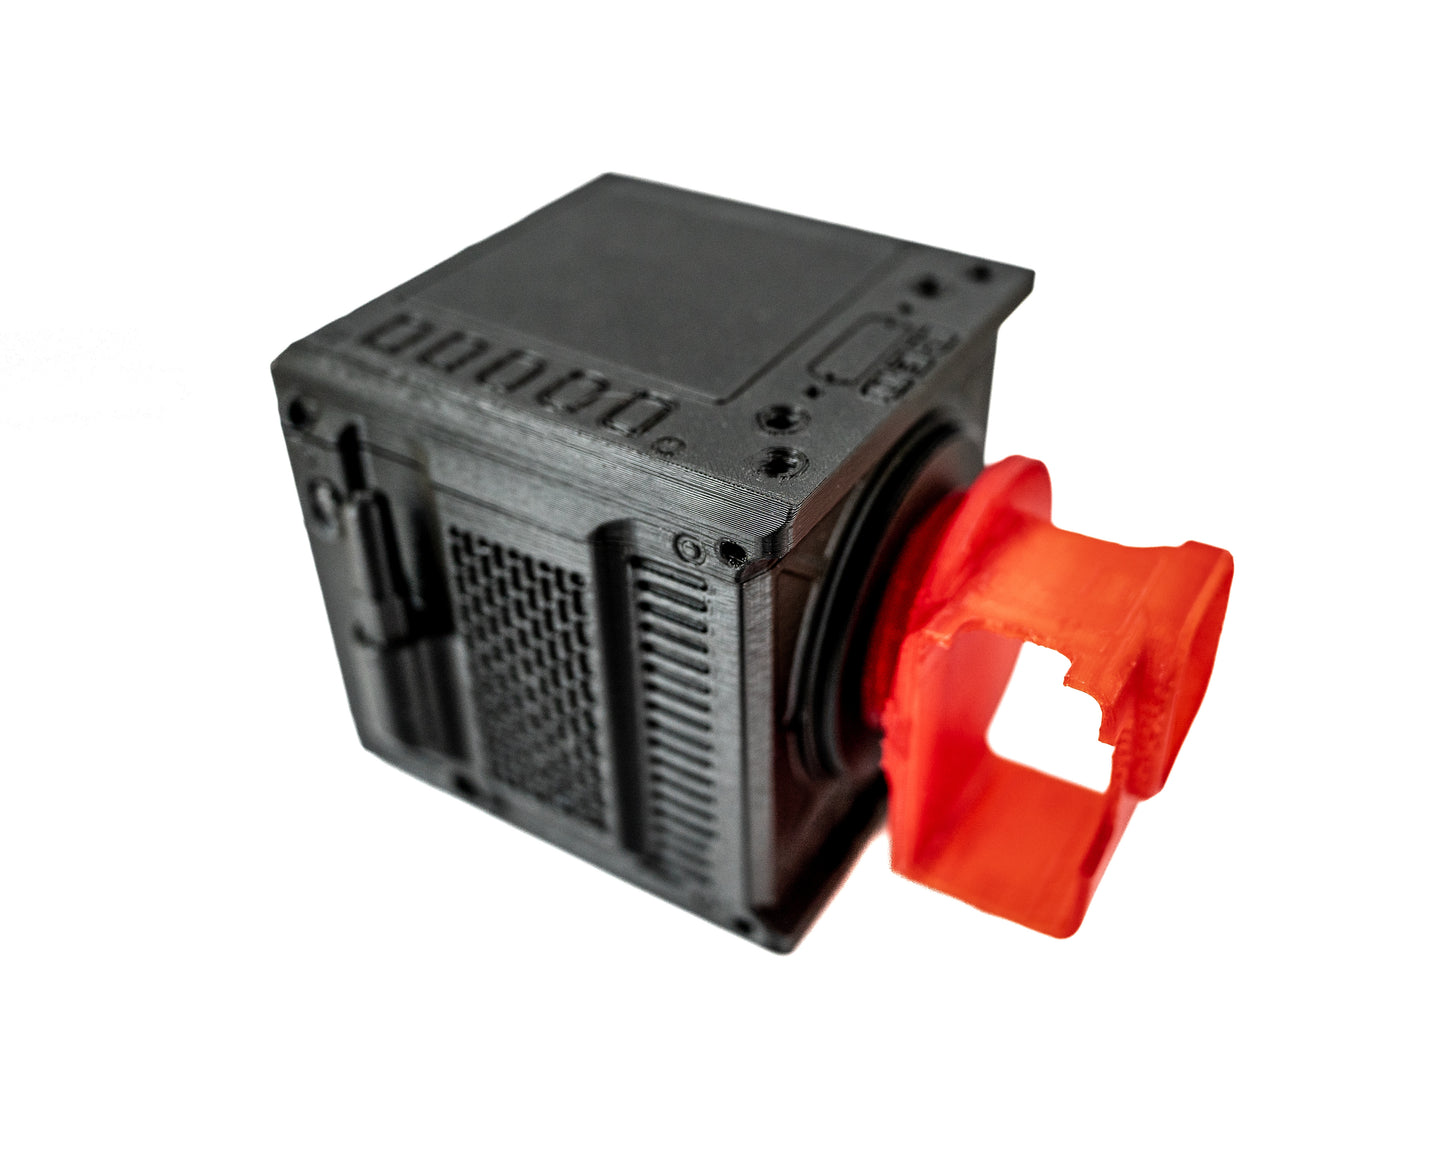 MWCD -RED- Komodo 3D printed (DUMMY CAMERA) for practice flying and modeling